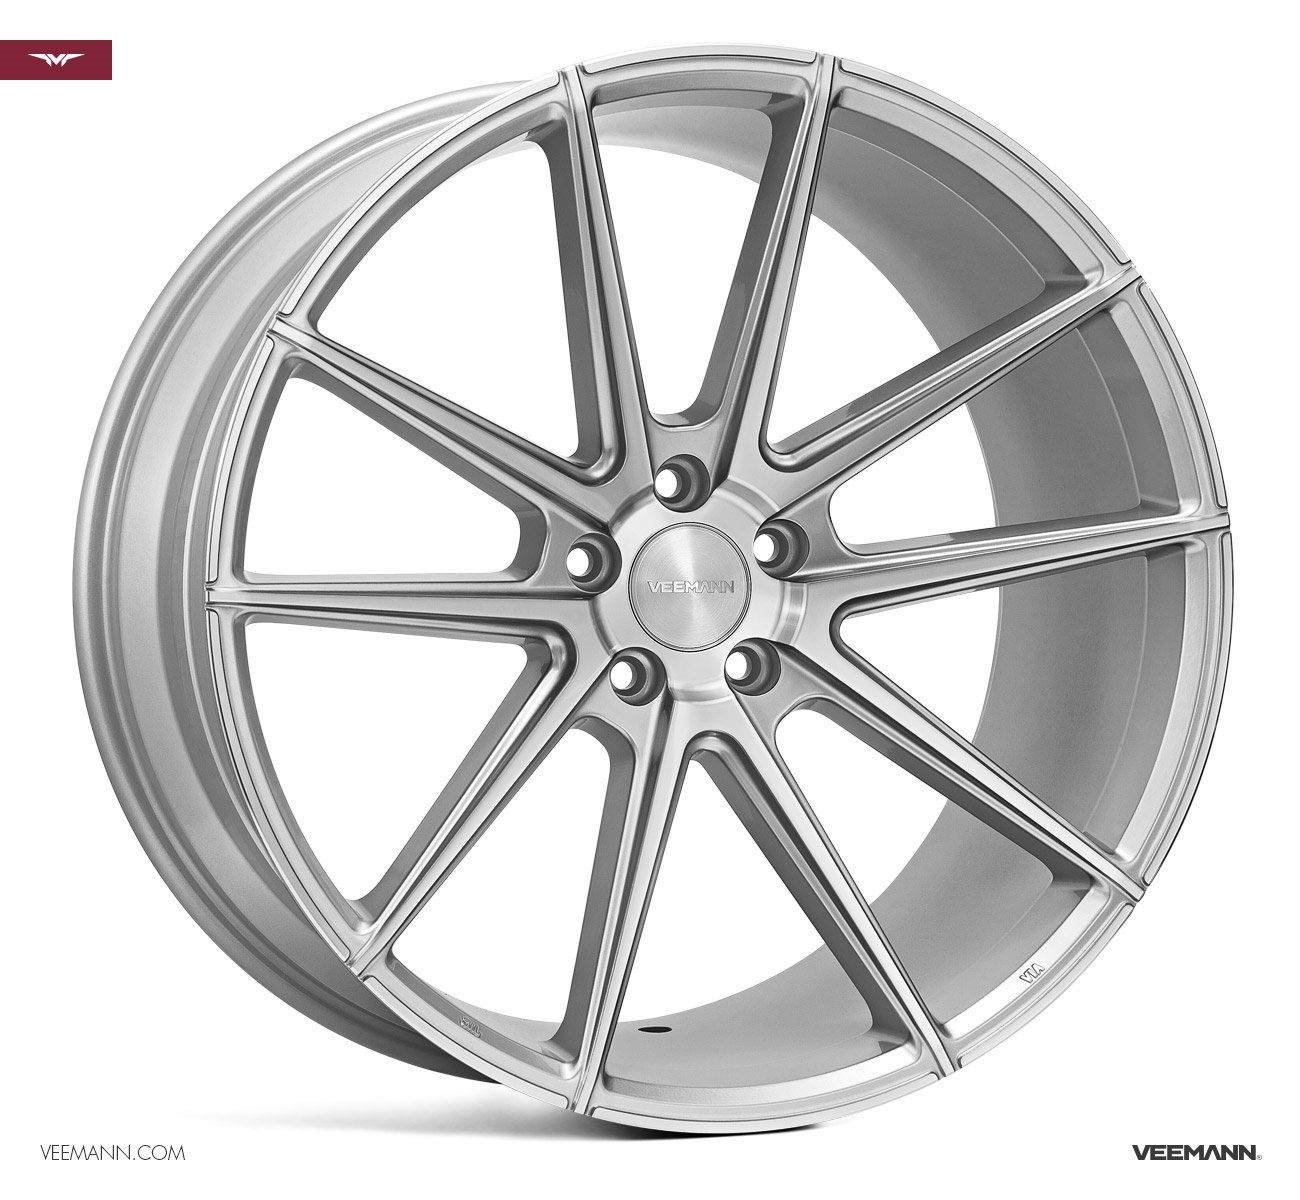 NEW 19  VEEMANN V FS4 ALLOY WHEELS IN SILVER POL WITH DEEPER CONCAVE 9 5  REARS et42 et42